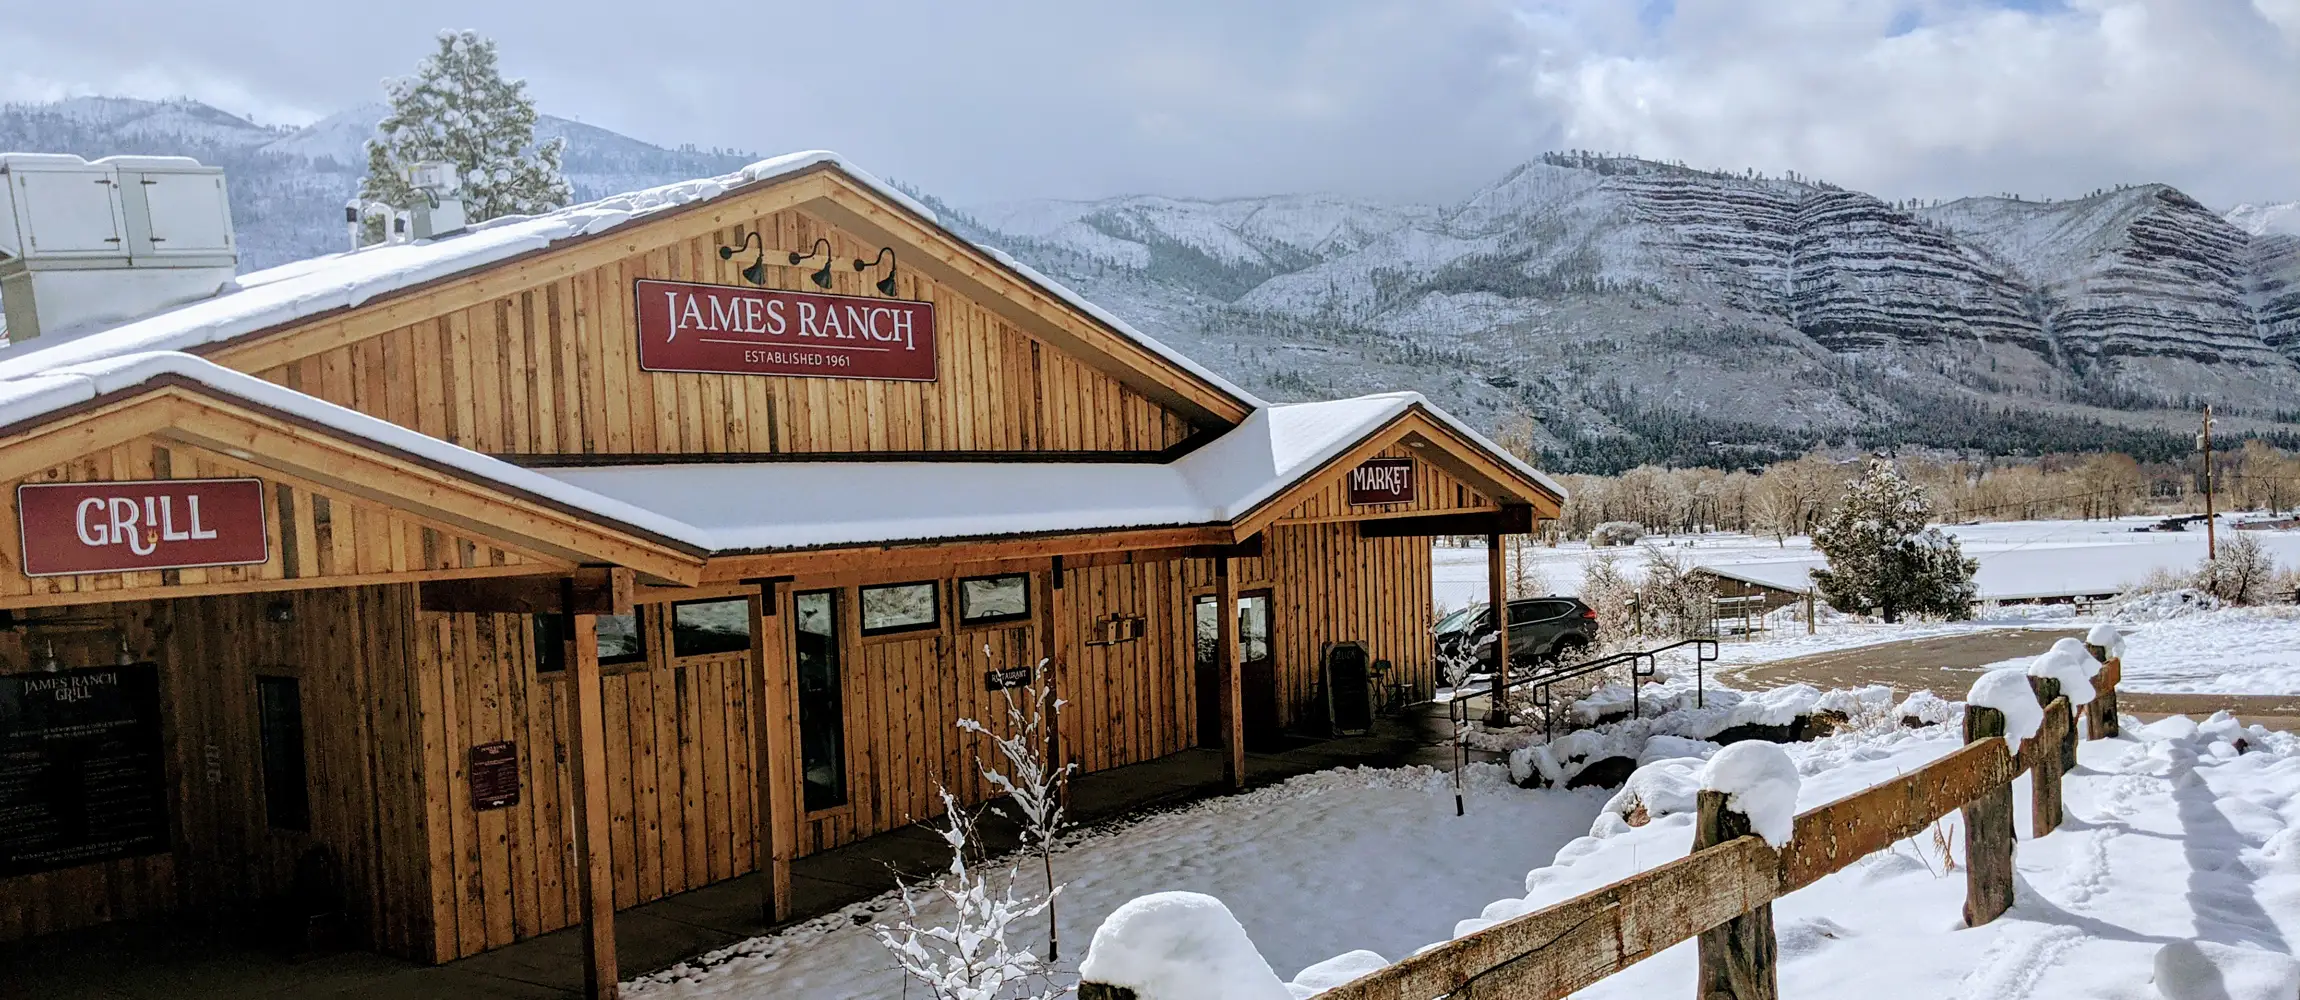 james ranch grill and market